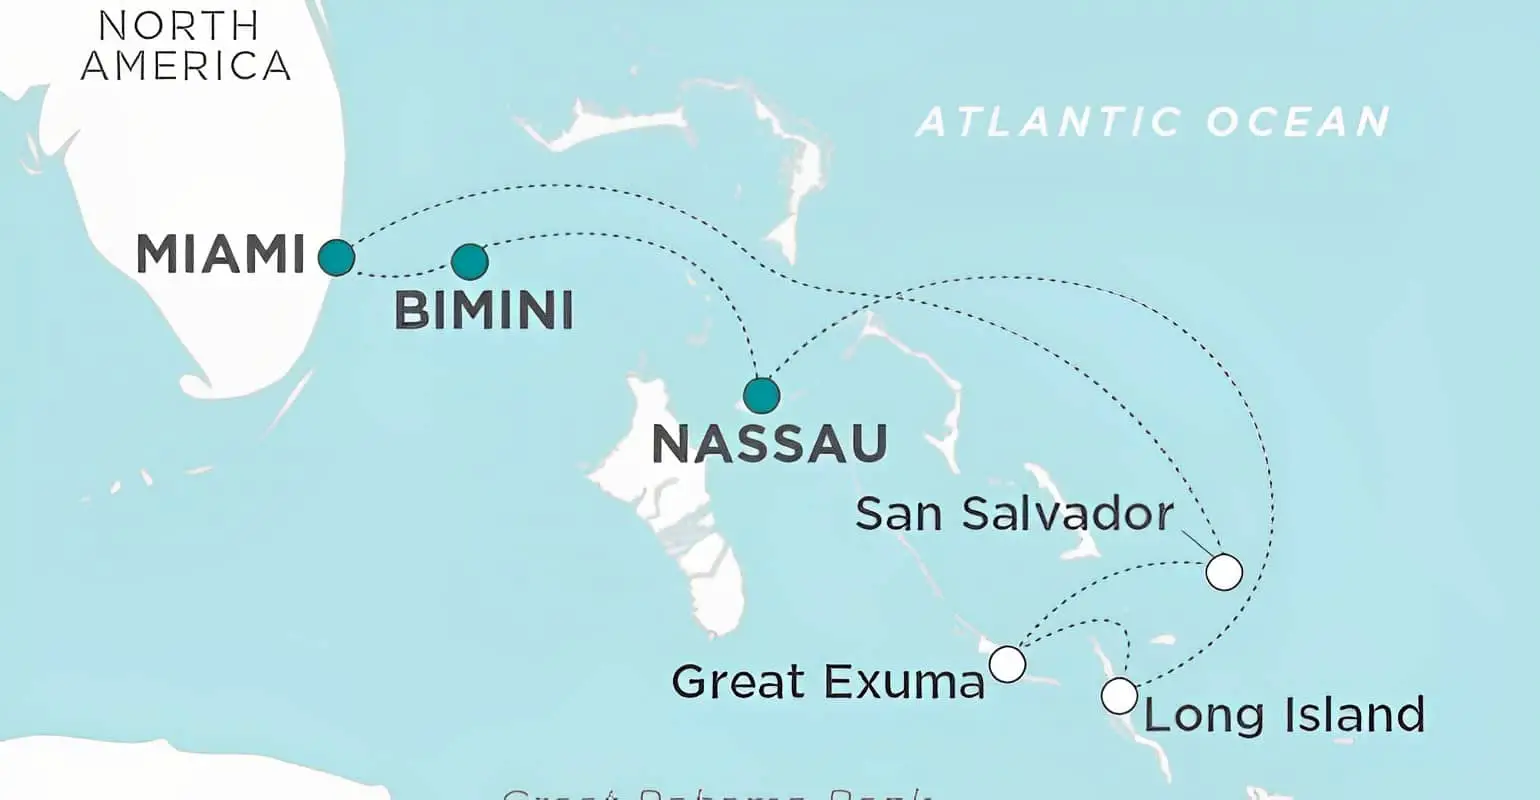 Traveling from Miami to The Bahamas: Your Best Options